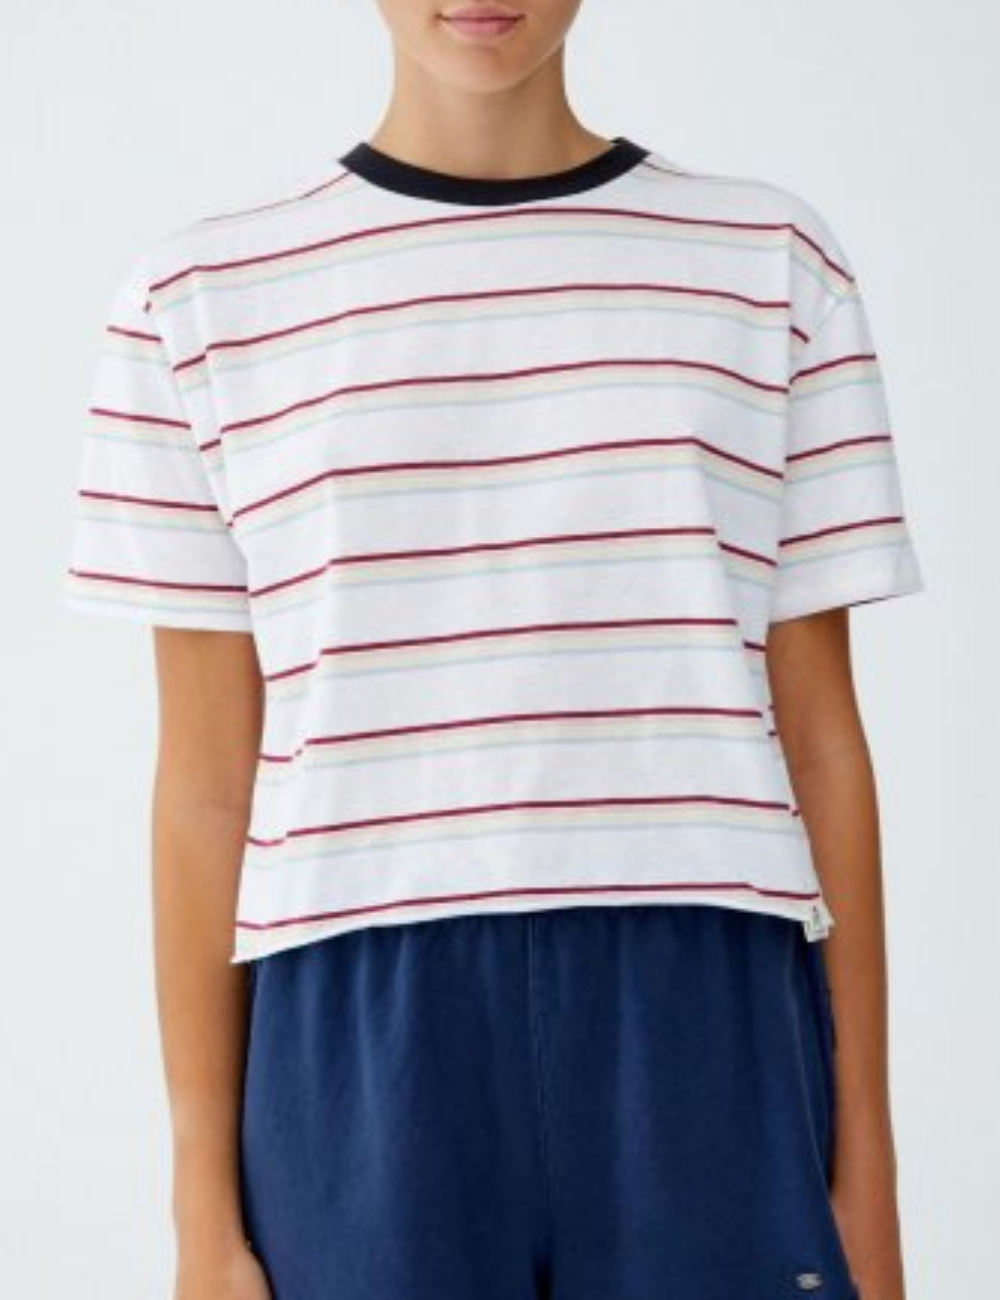 Put away clothes Frugal relieve Tricou Pull&Bear, mix culori 51618 | creamoutlet.ro